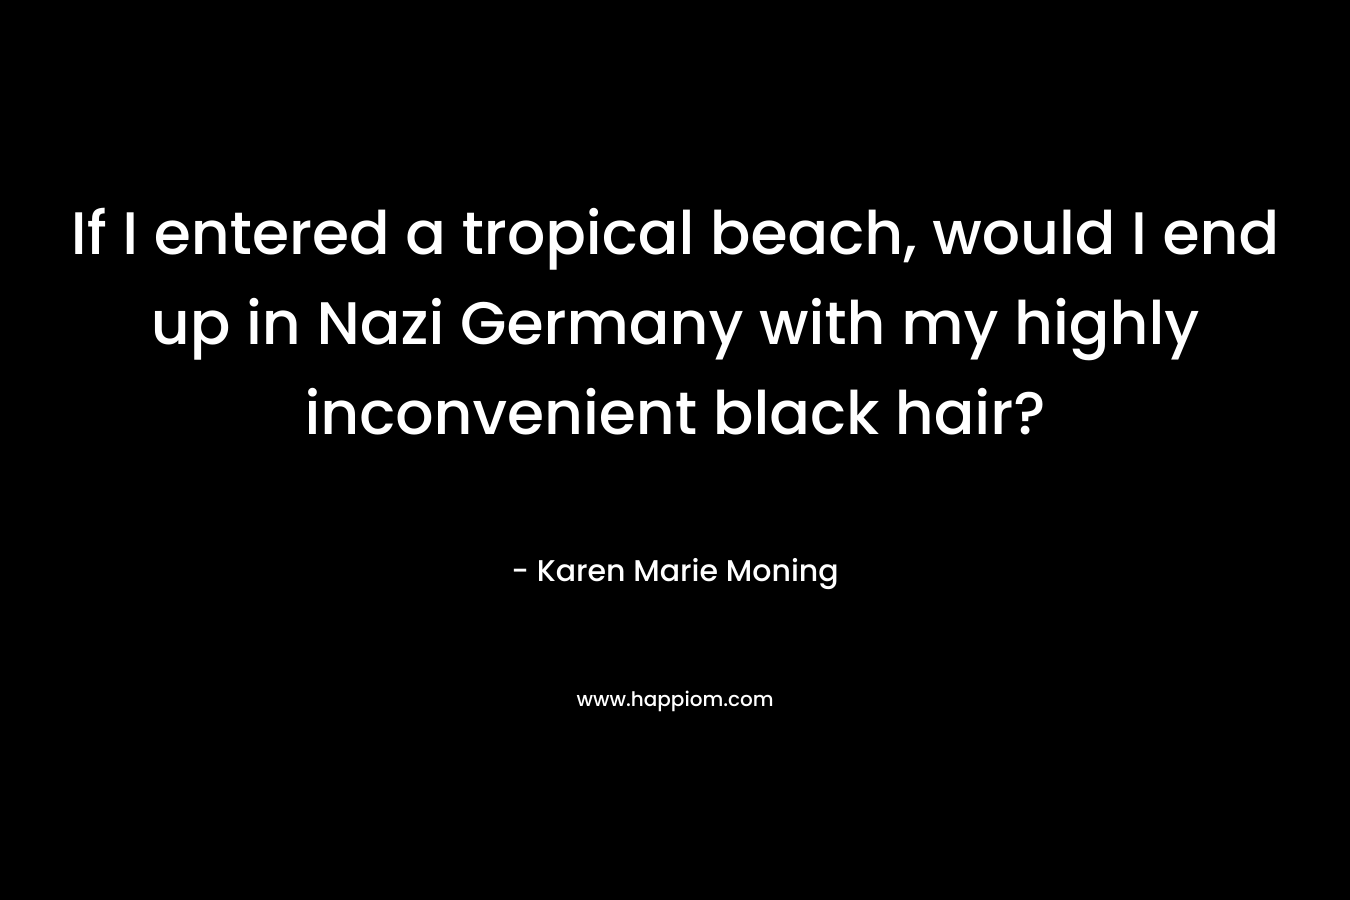 If I entered a tropical beach, would I end up in Nazi Germany with my highly inconvenient black hair? – Karen Marie Moning